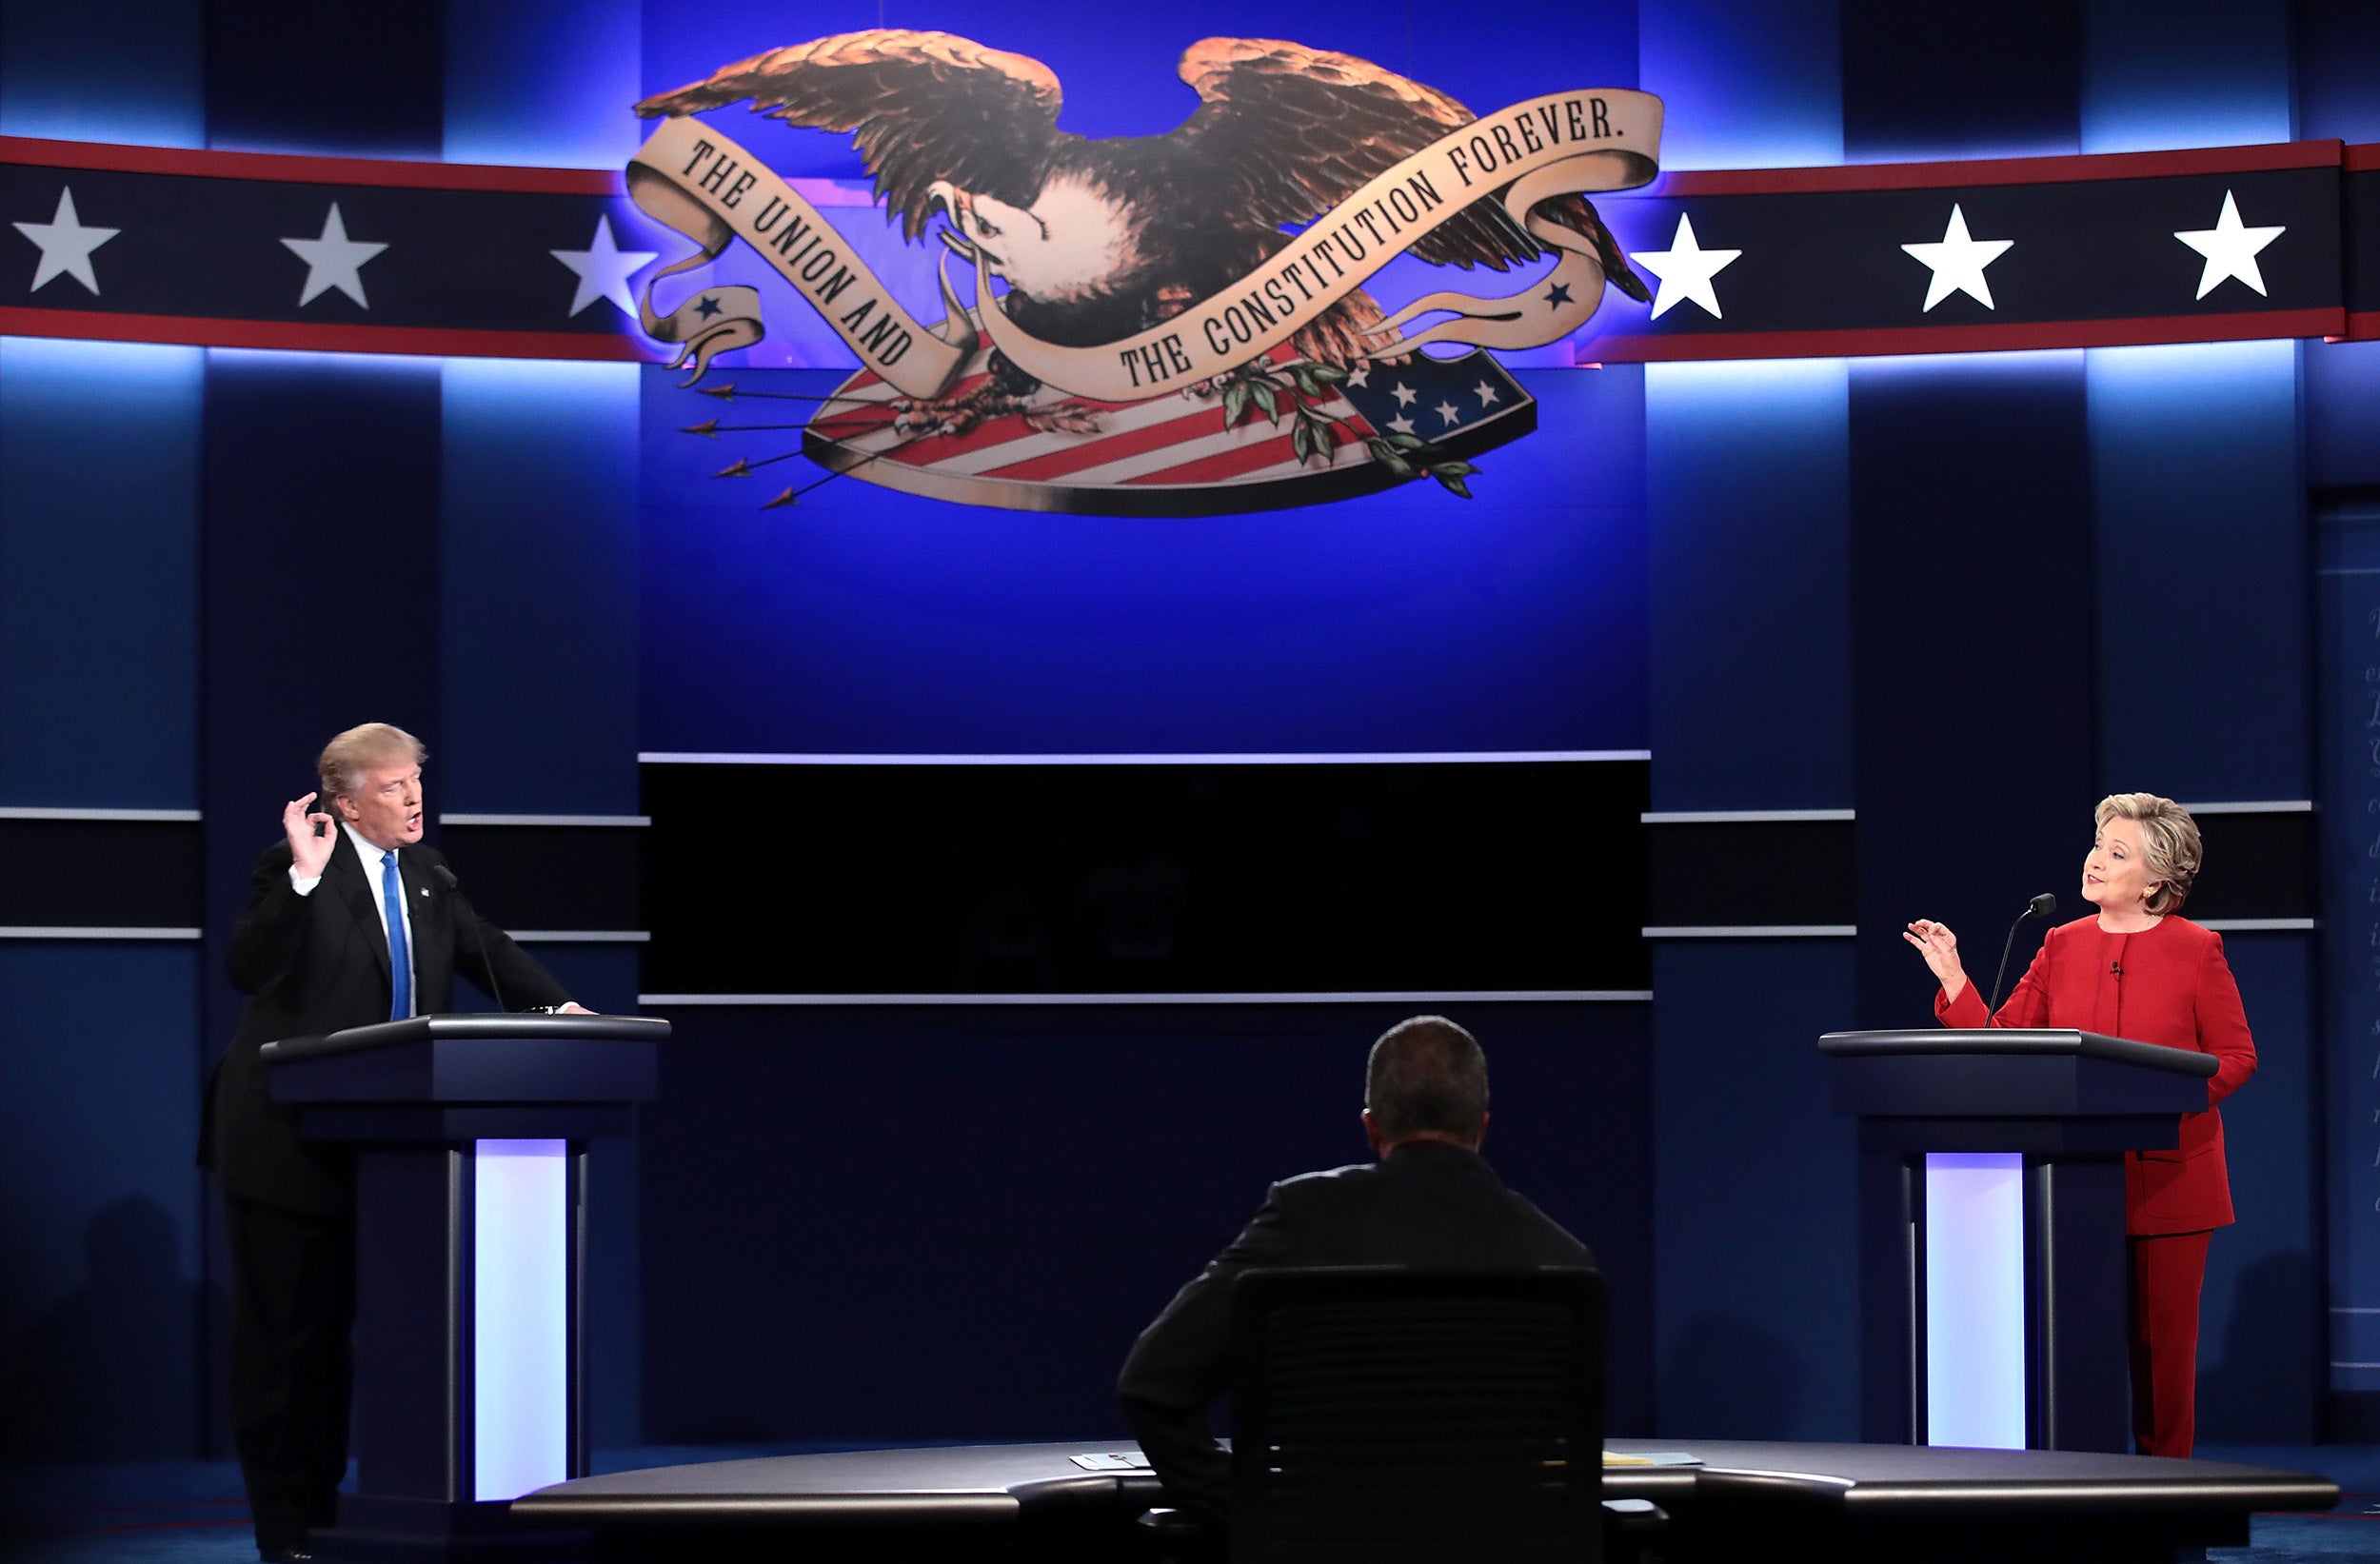 Donald Trump and Hillary Clinton face-off during a televised debate during the 2016 US presidential campaign